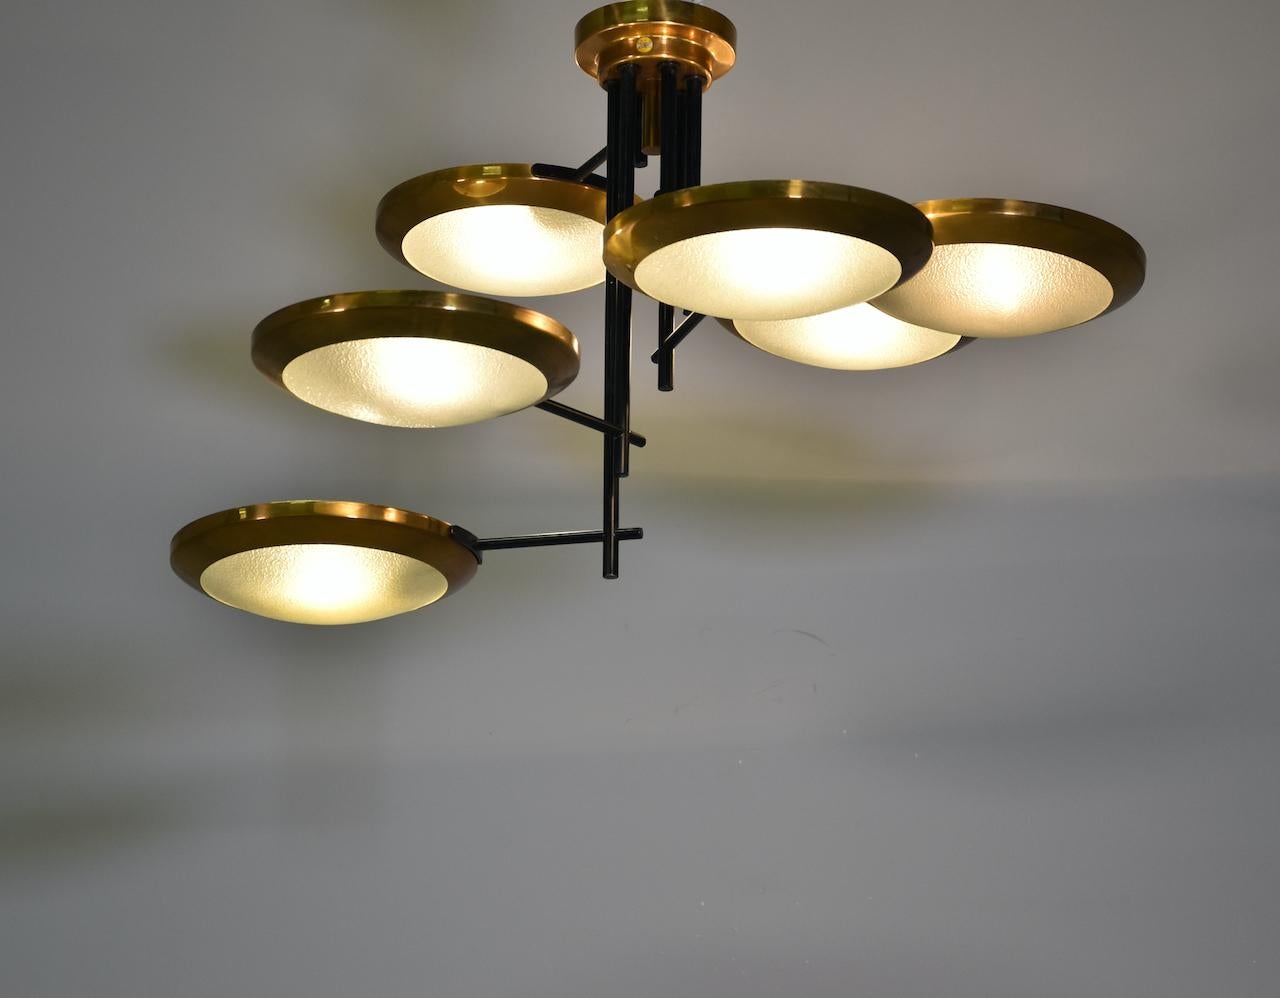 20th Century Rare Stilnovo Six Discs Ceiling Lamp in Brass and Glass, Italy 1950s For Sale